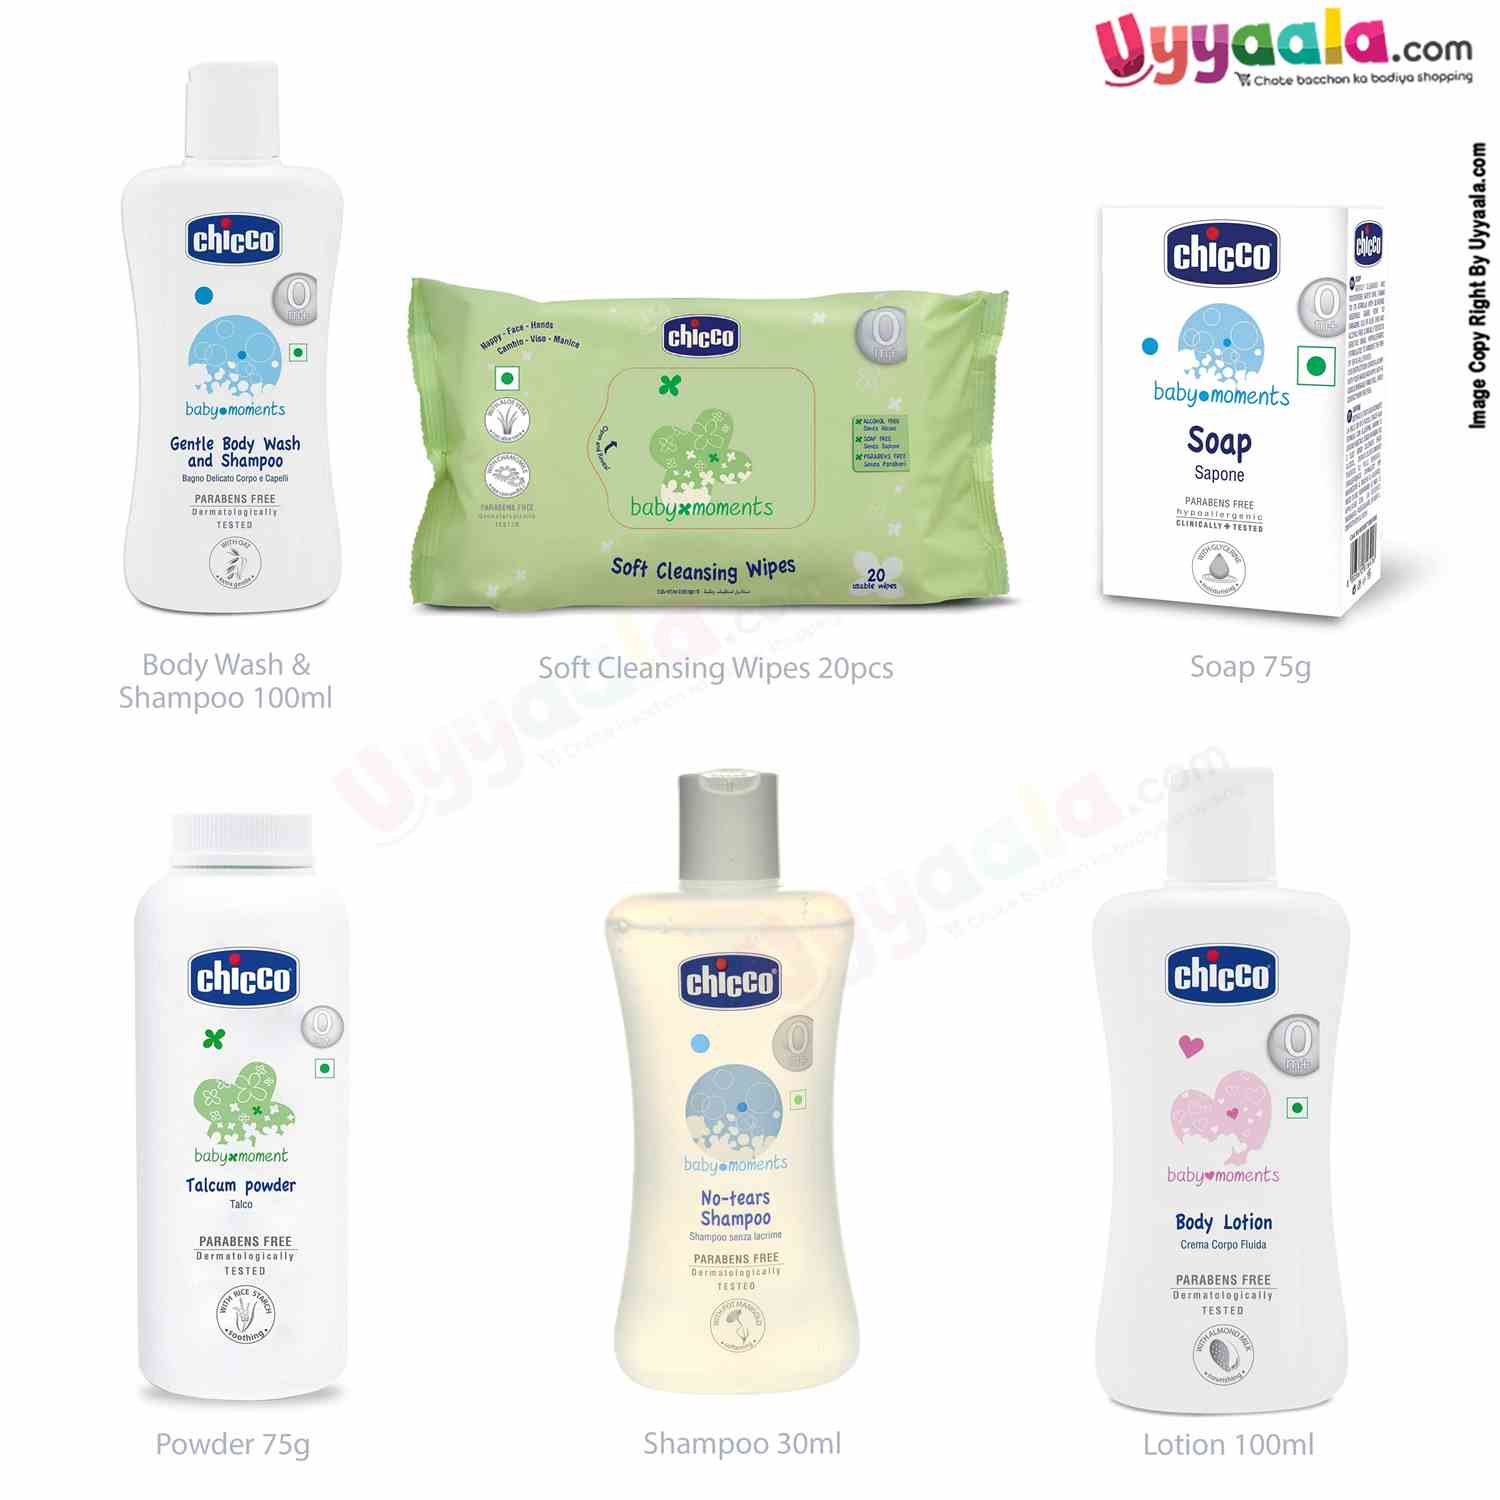 Baby lotion, shampoo, body wash, soap, powder & cleansing wipes combo pack